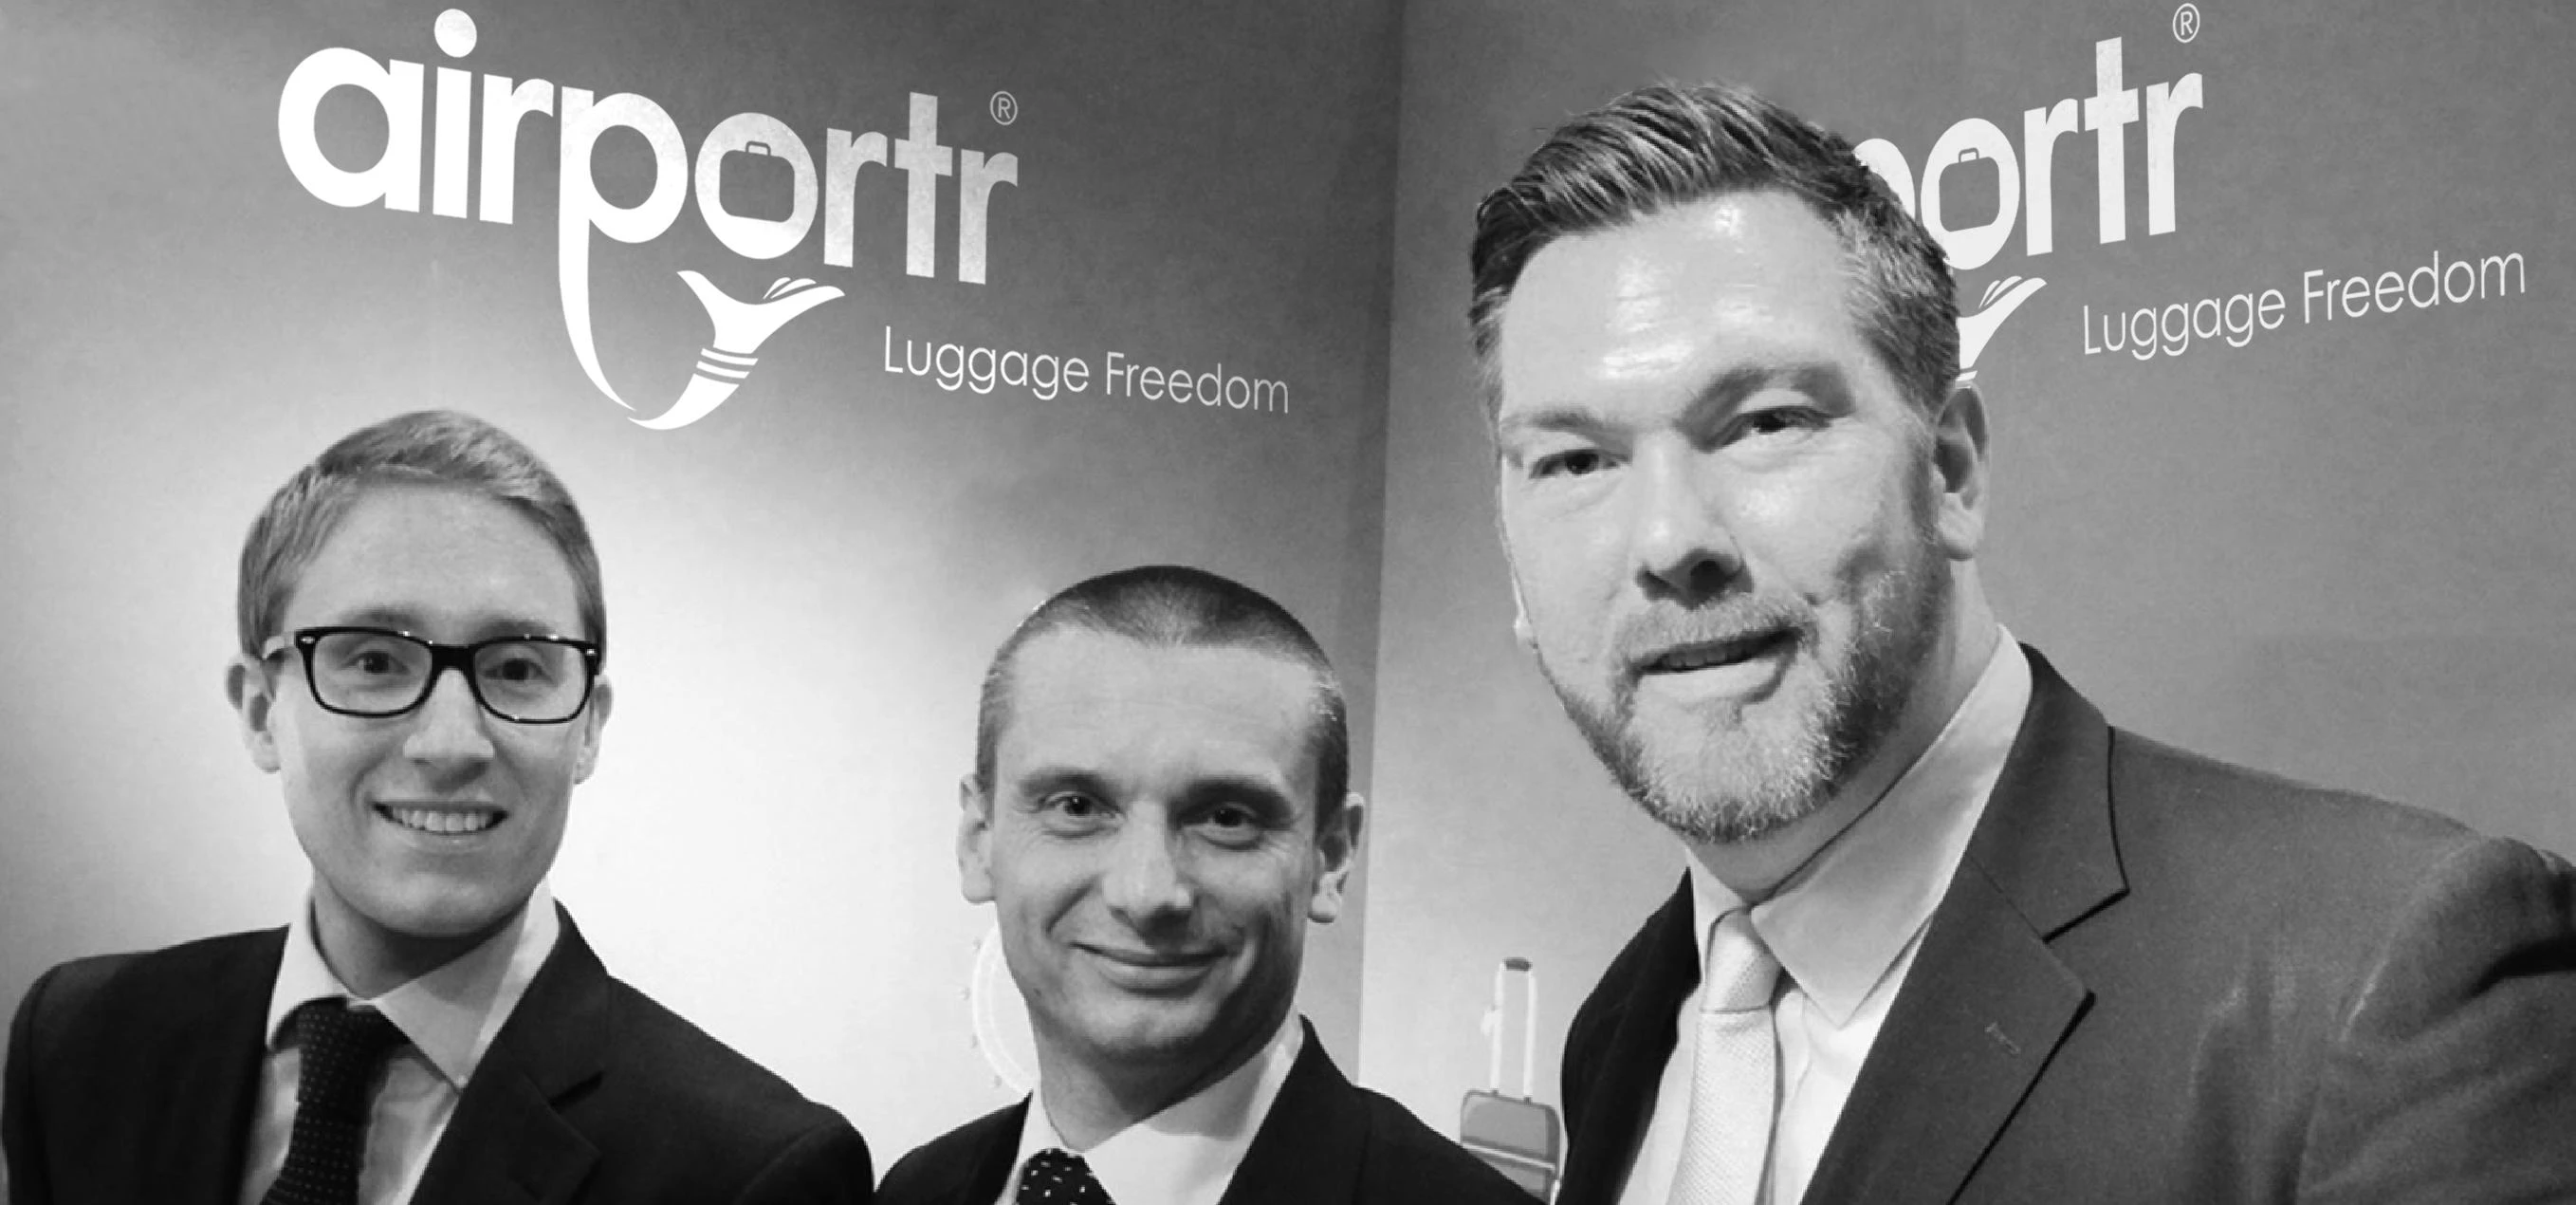 Portr founders CEO Randel Darby, COO Darren Payne and CMO Chris Walsh.